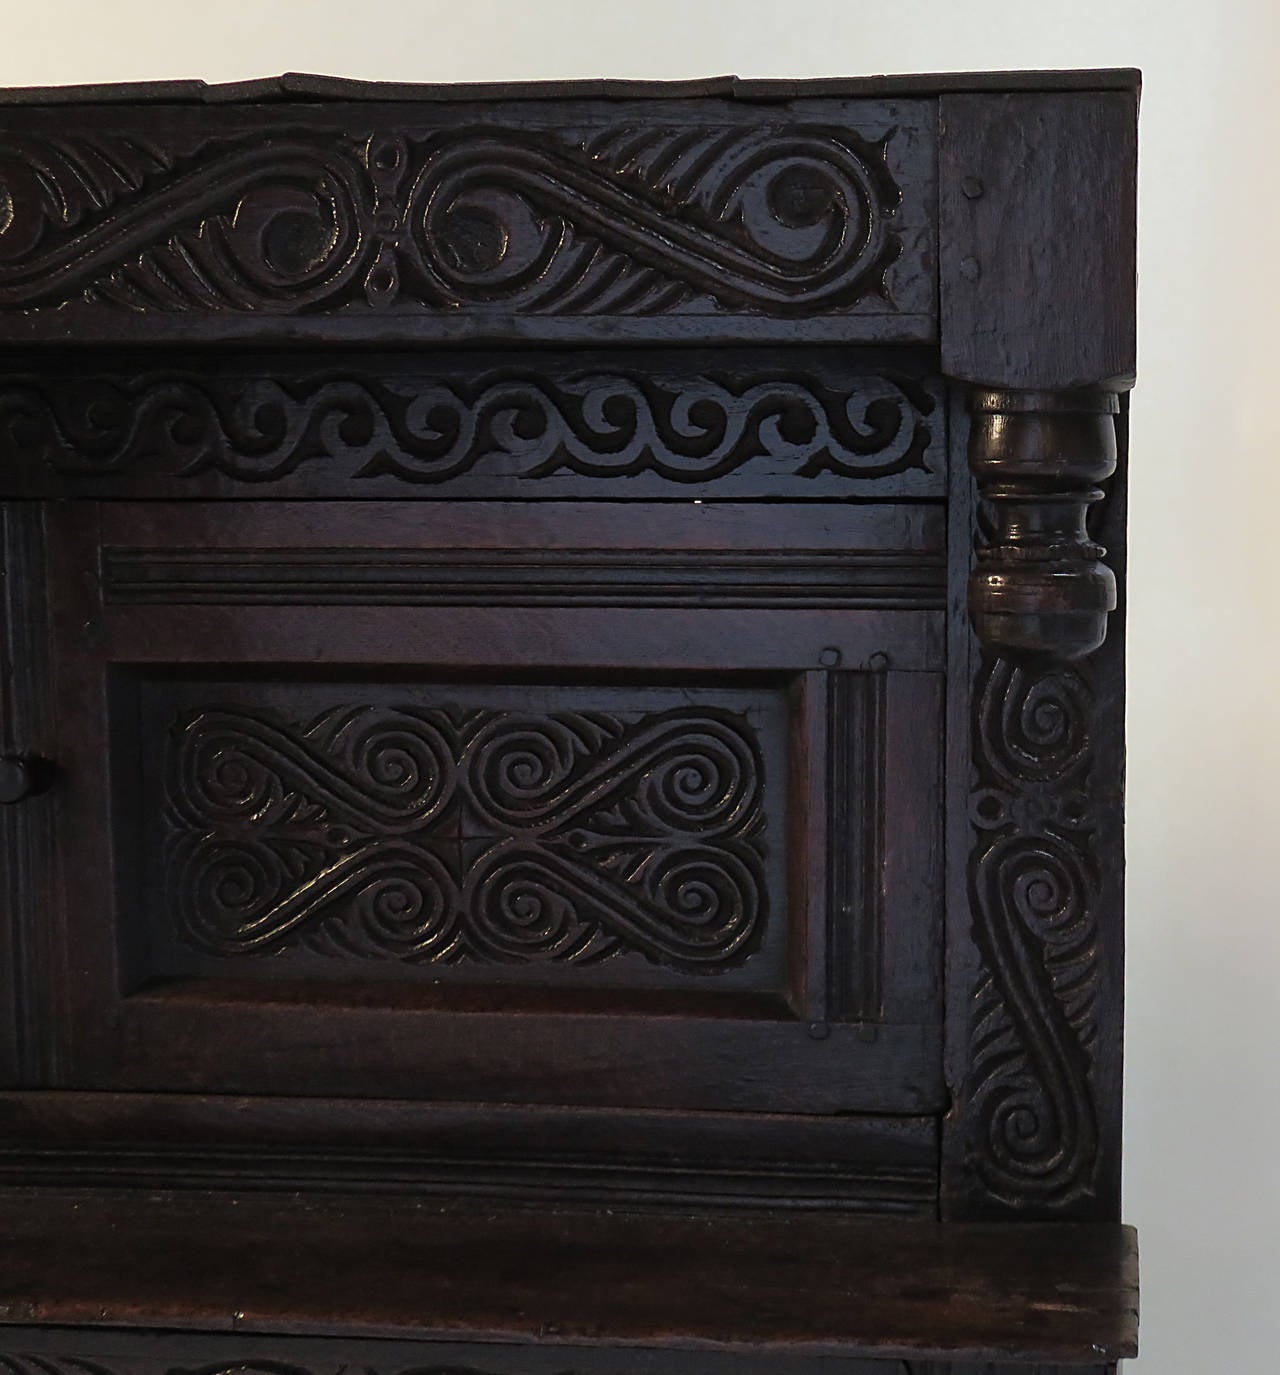 An unusually large and well carved English oak court cupboard made during the last quarter of the 17th century. The wonderful carvings appear to be original and suggest the piece originated in the Northern part of the country. From a collection